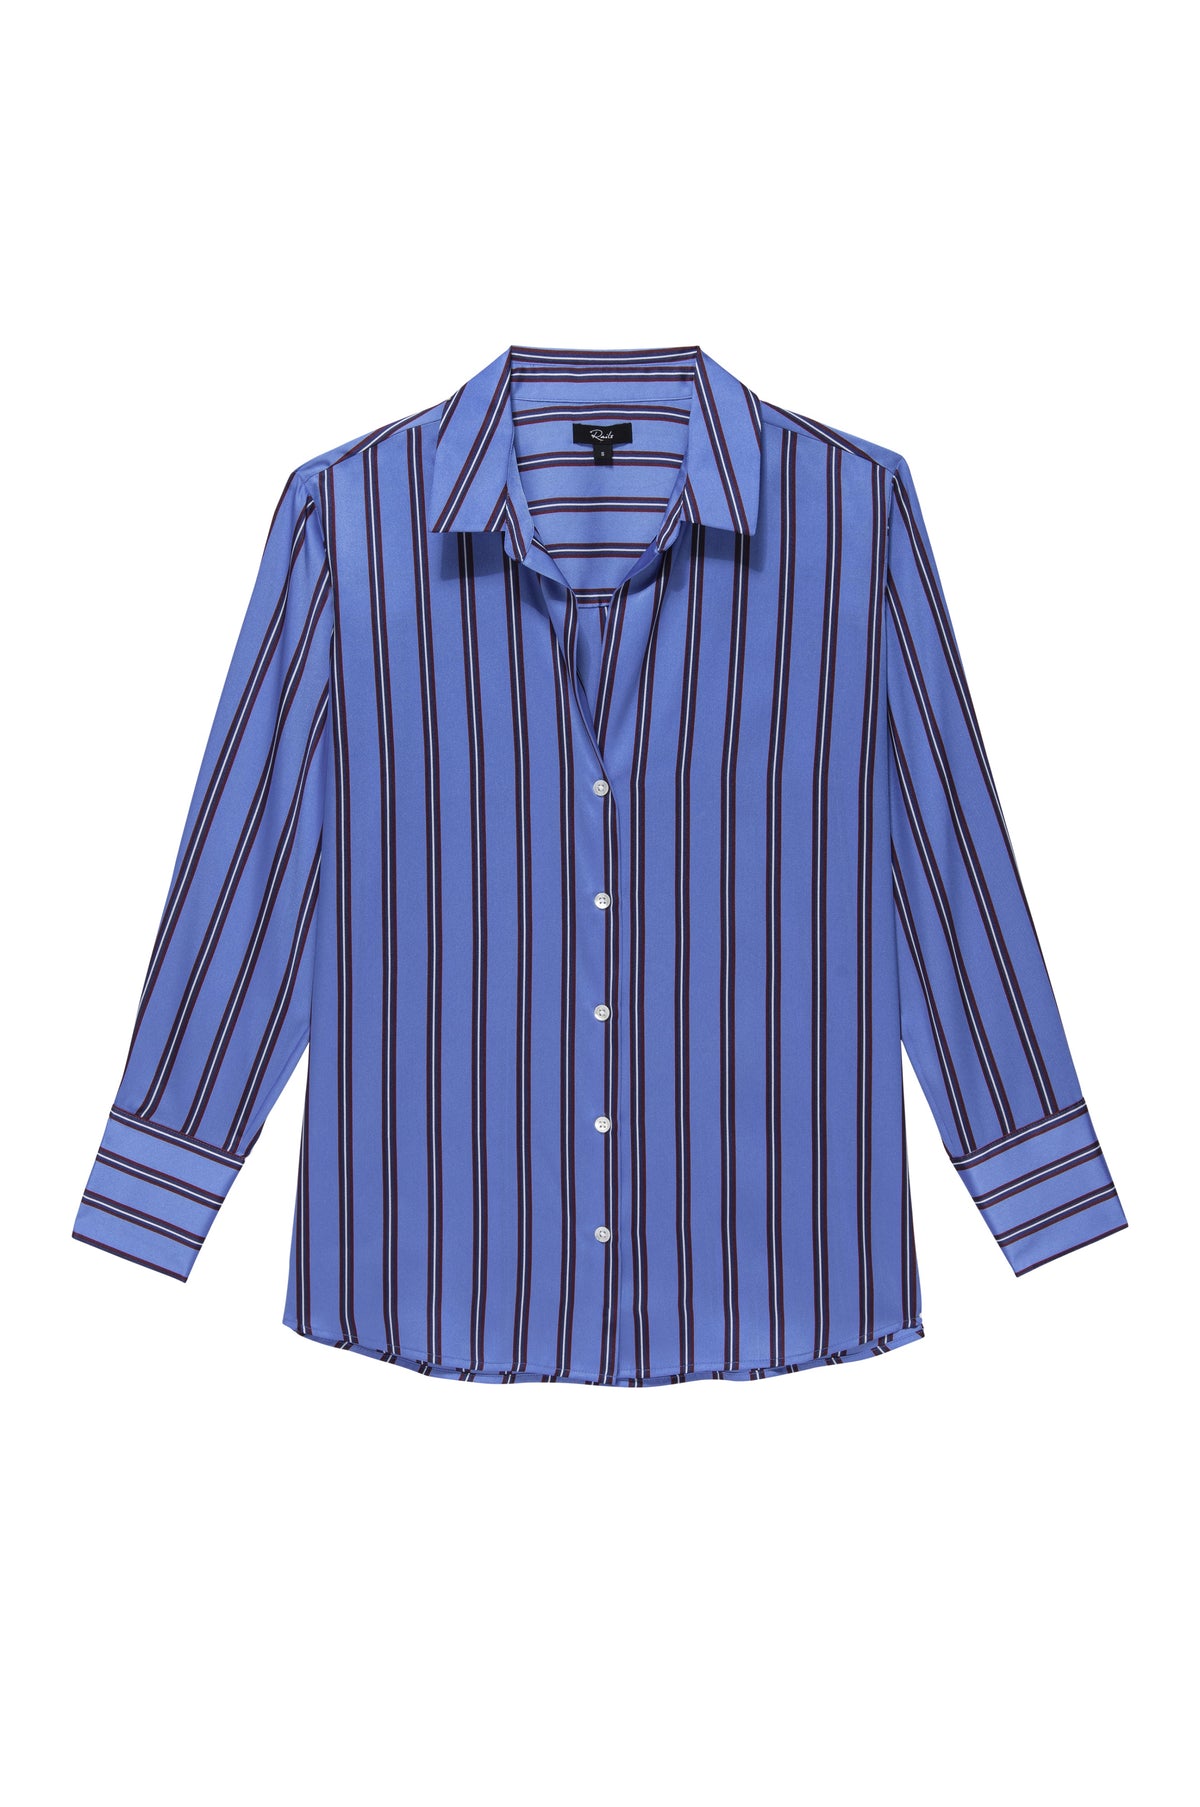 Blue satin shirt with long sleeves and button fastening with a vertical burgundy navy and white stripe